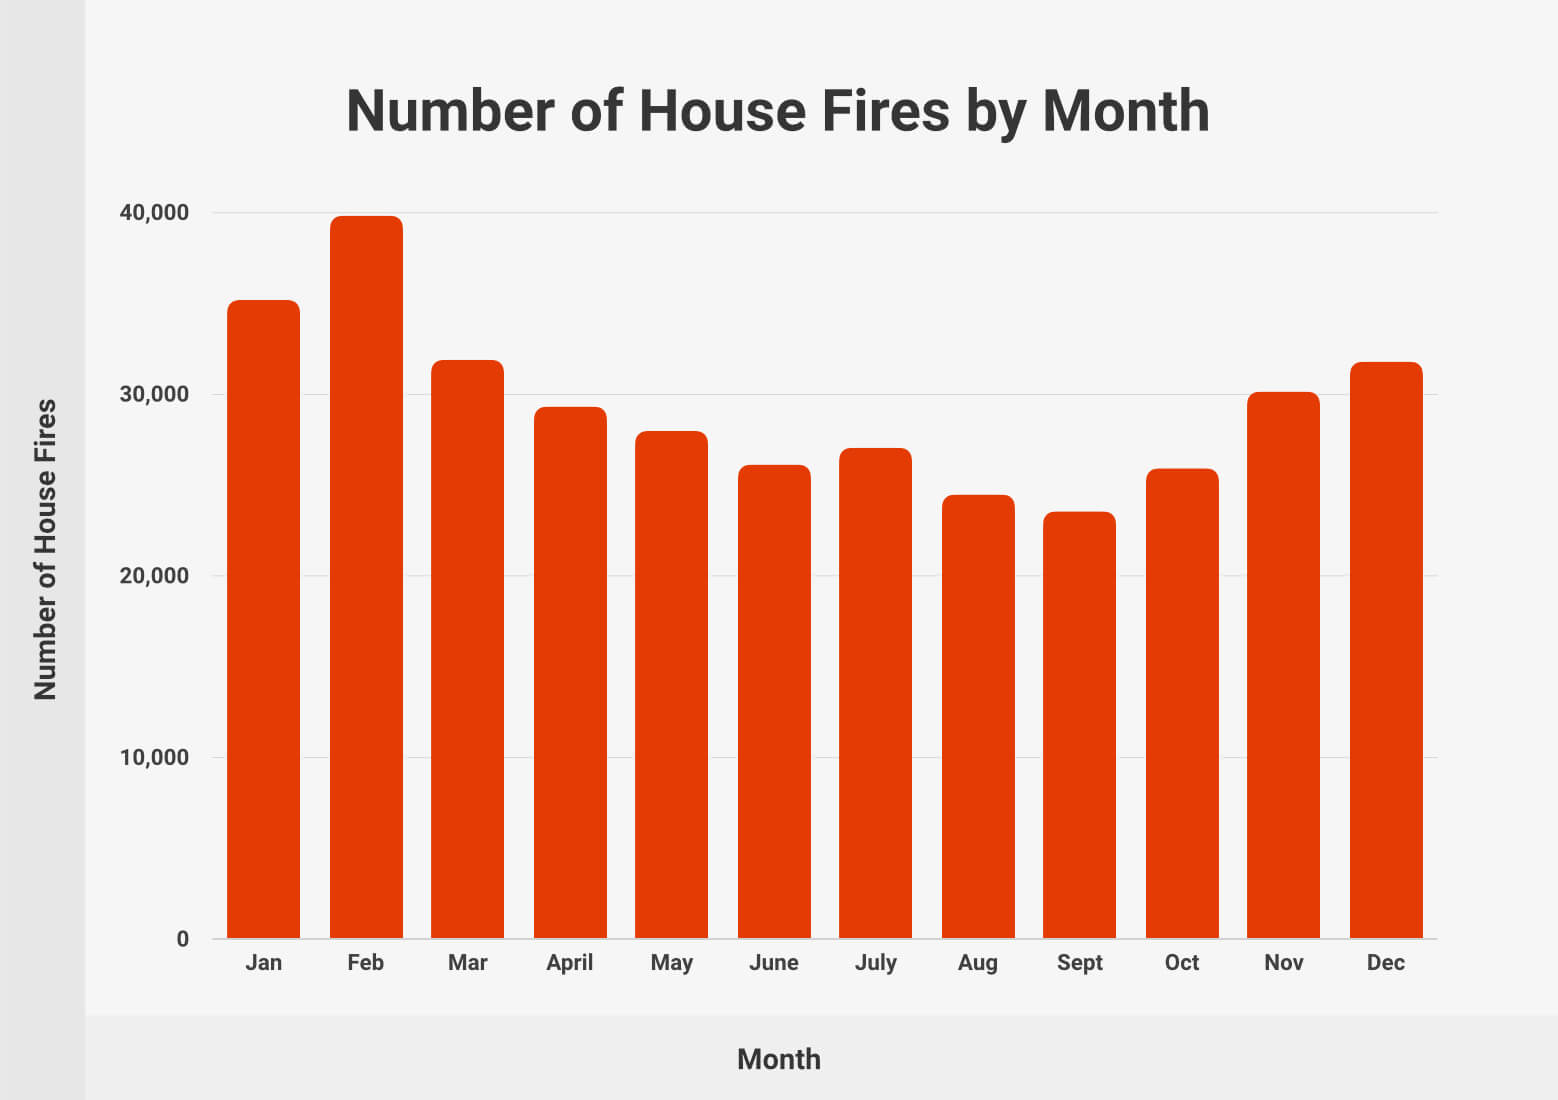 Number of House Fires by Month